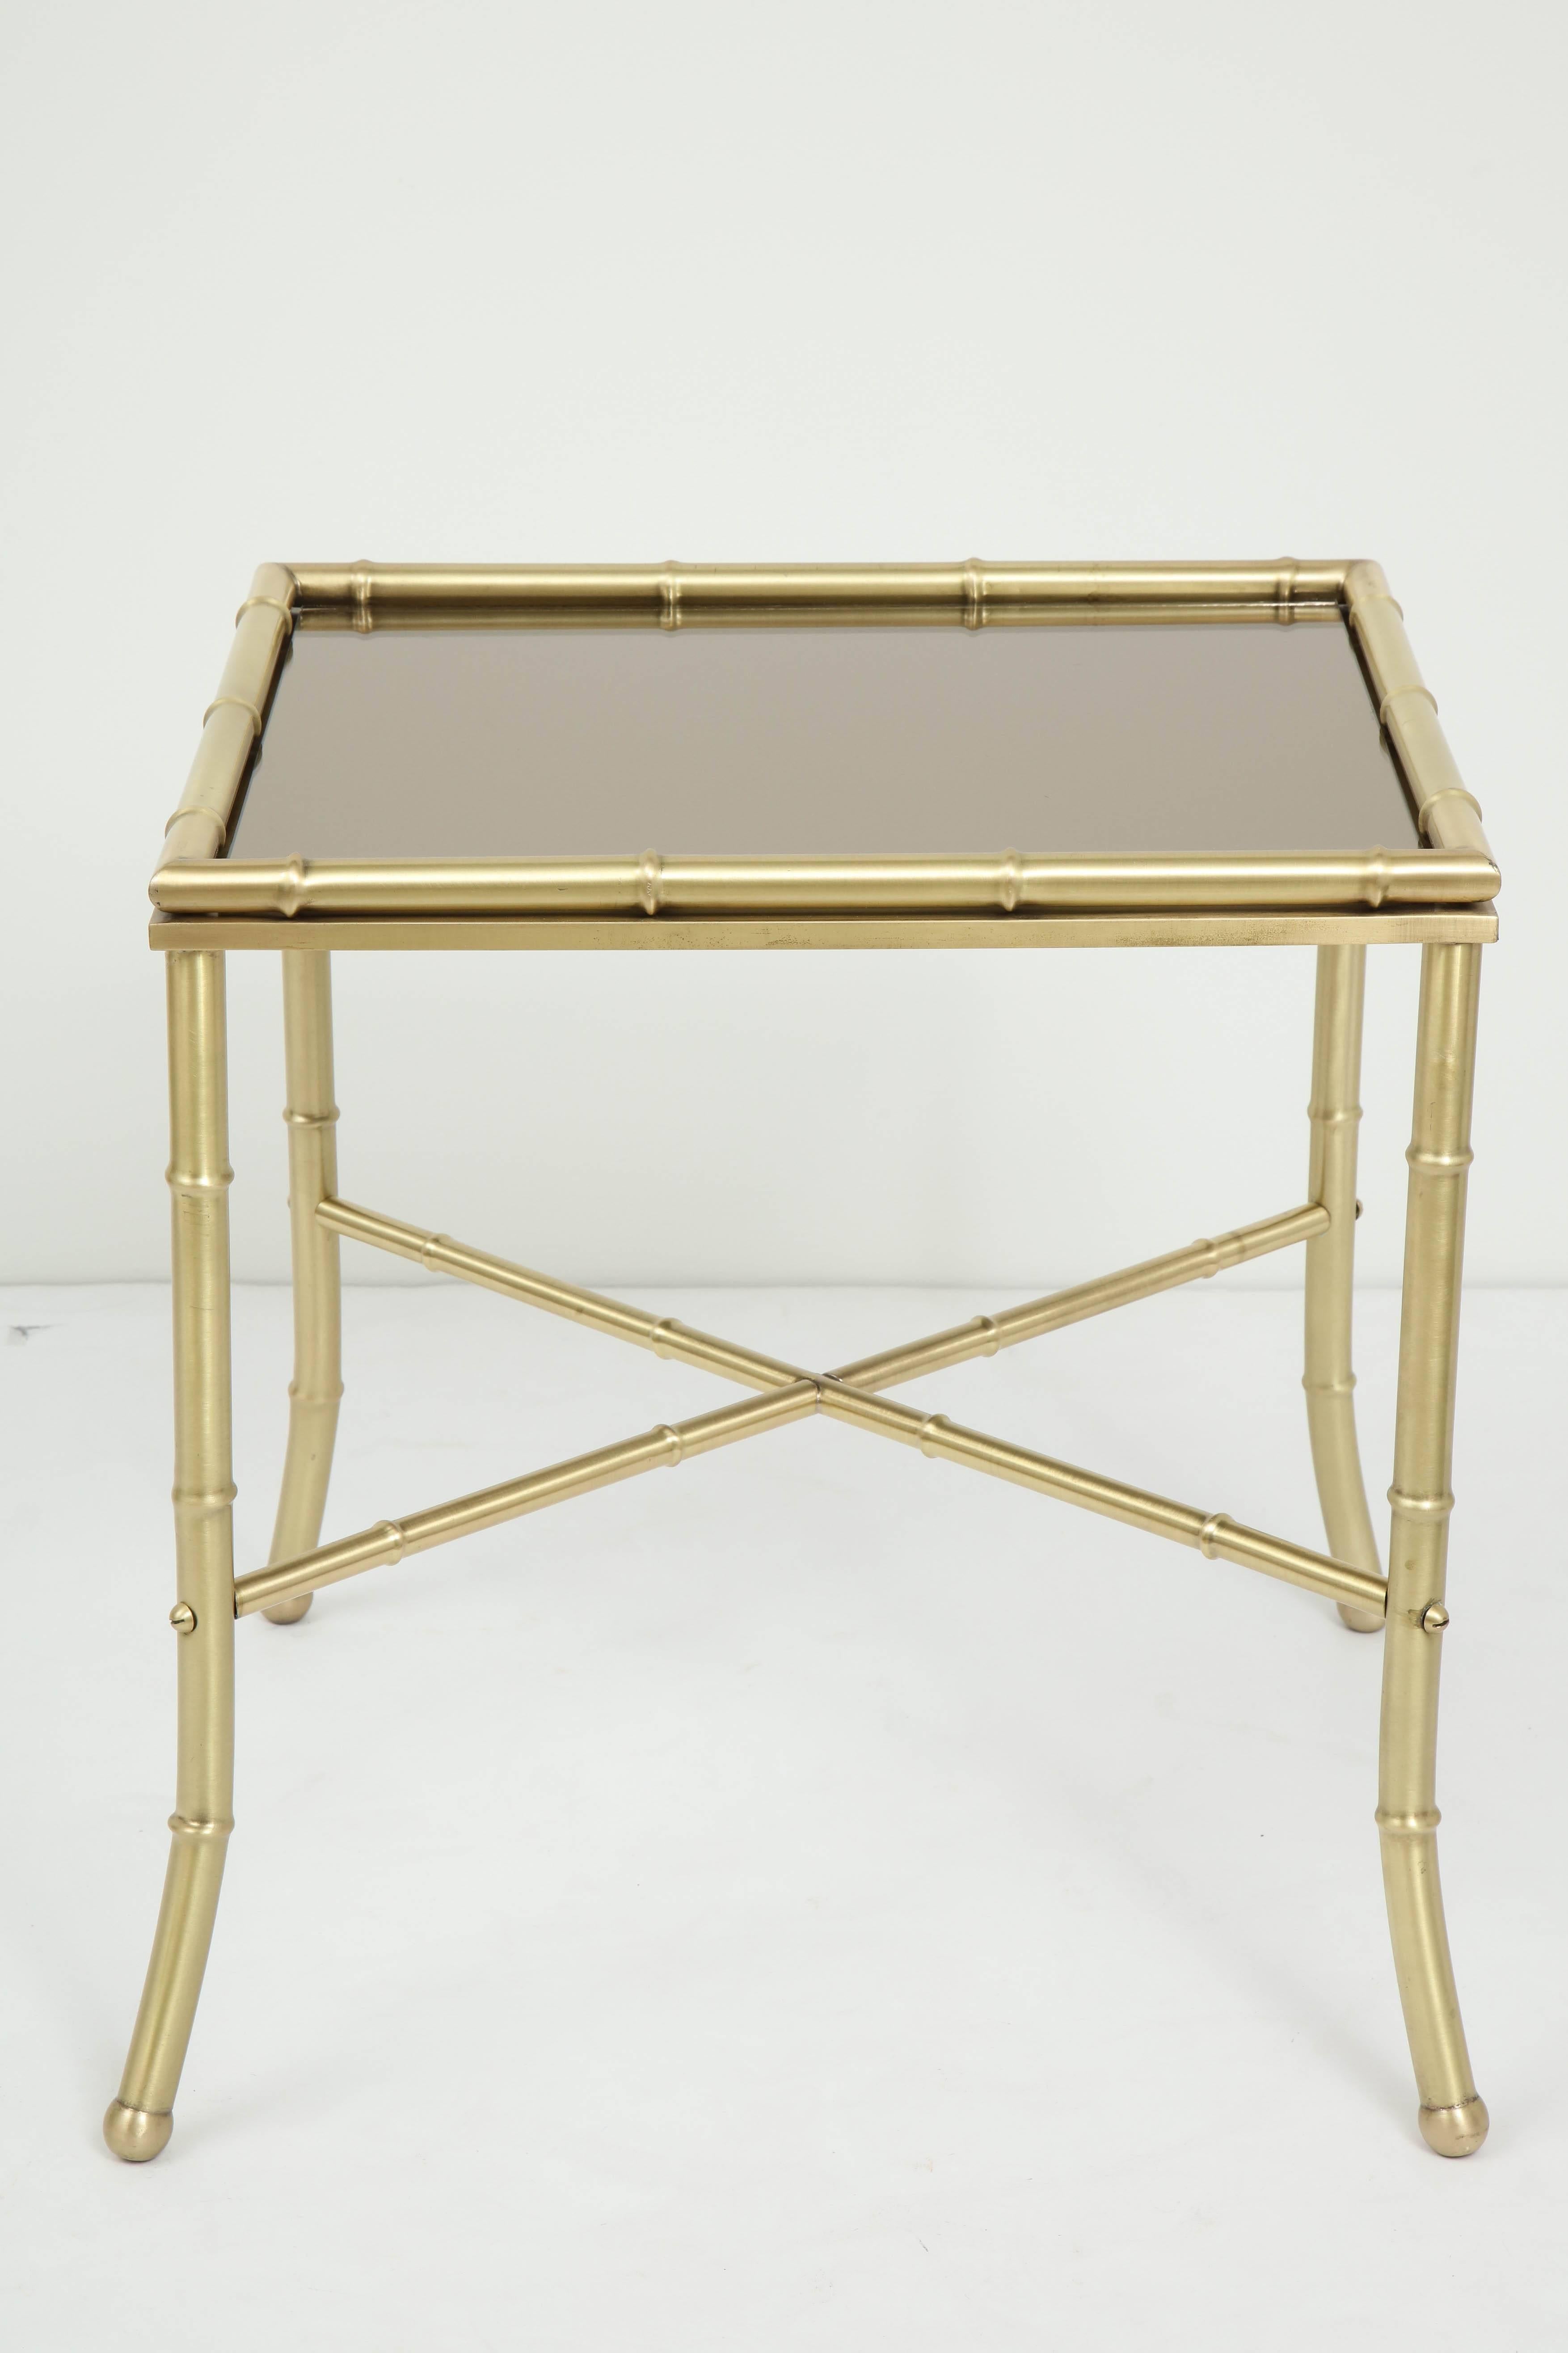 French 1960s stylized satin finished brass bamboo side tables with bronze mirror inset tops splayed legs and stretcher, style of Maison Jansen.